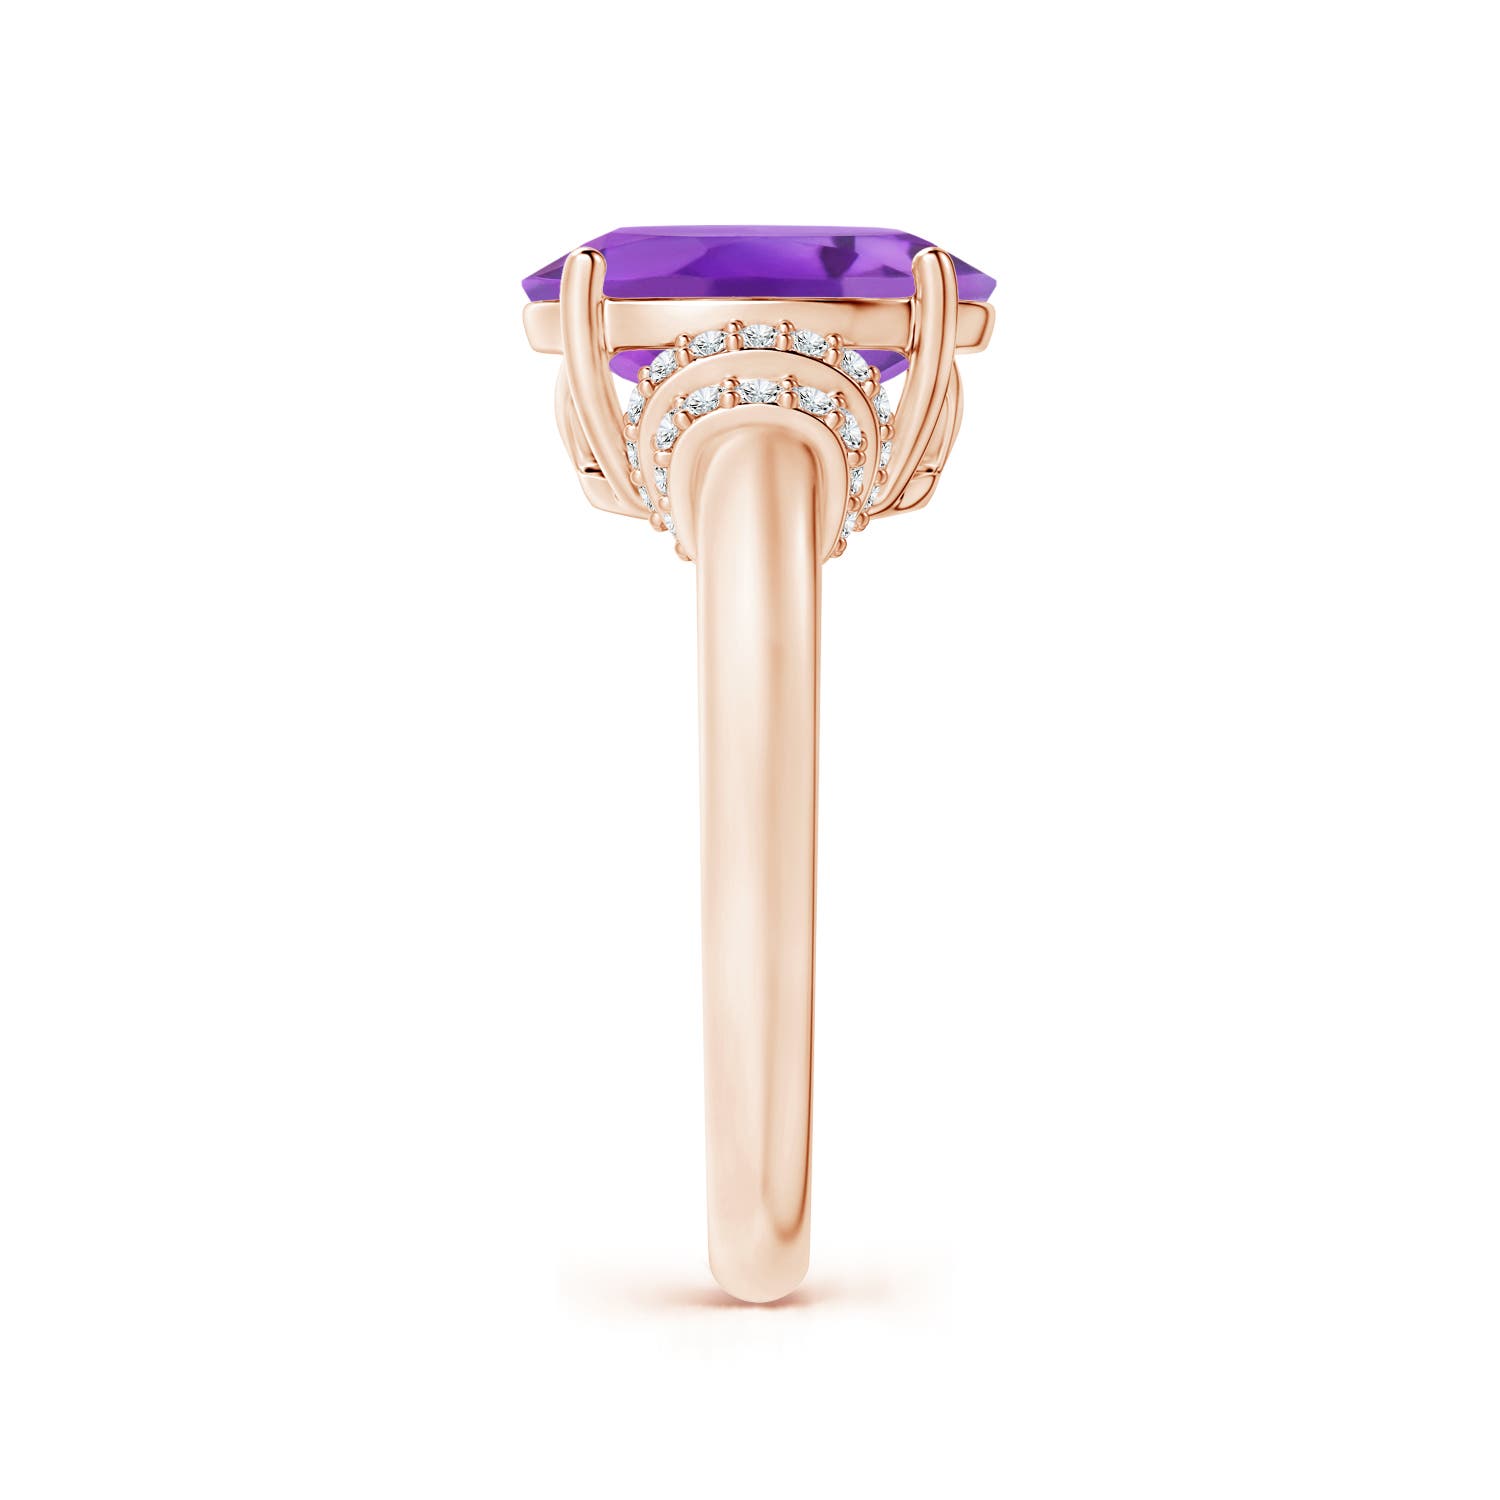 AA - Amethyst / 3.35 CT / 14 KT Rose Gold